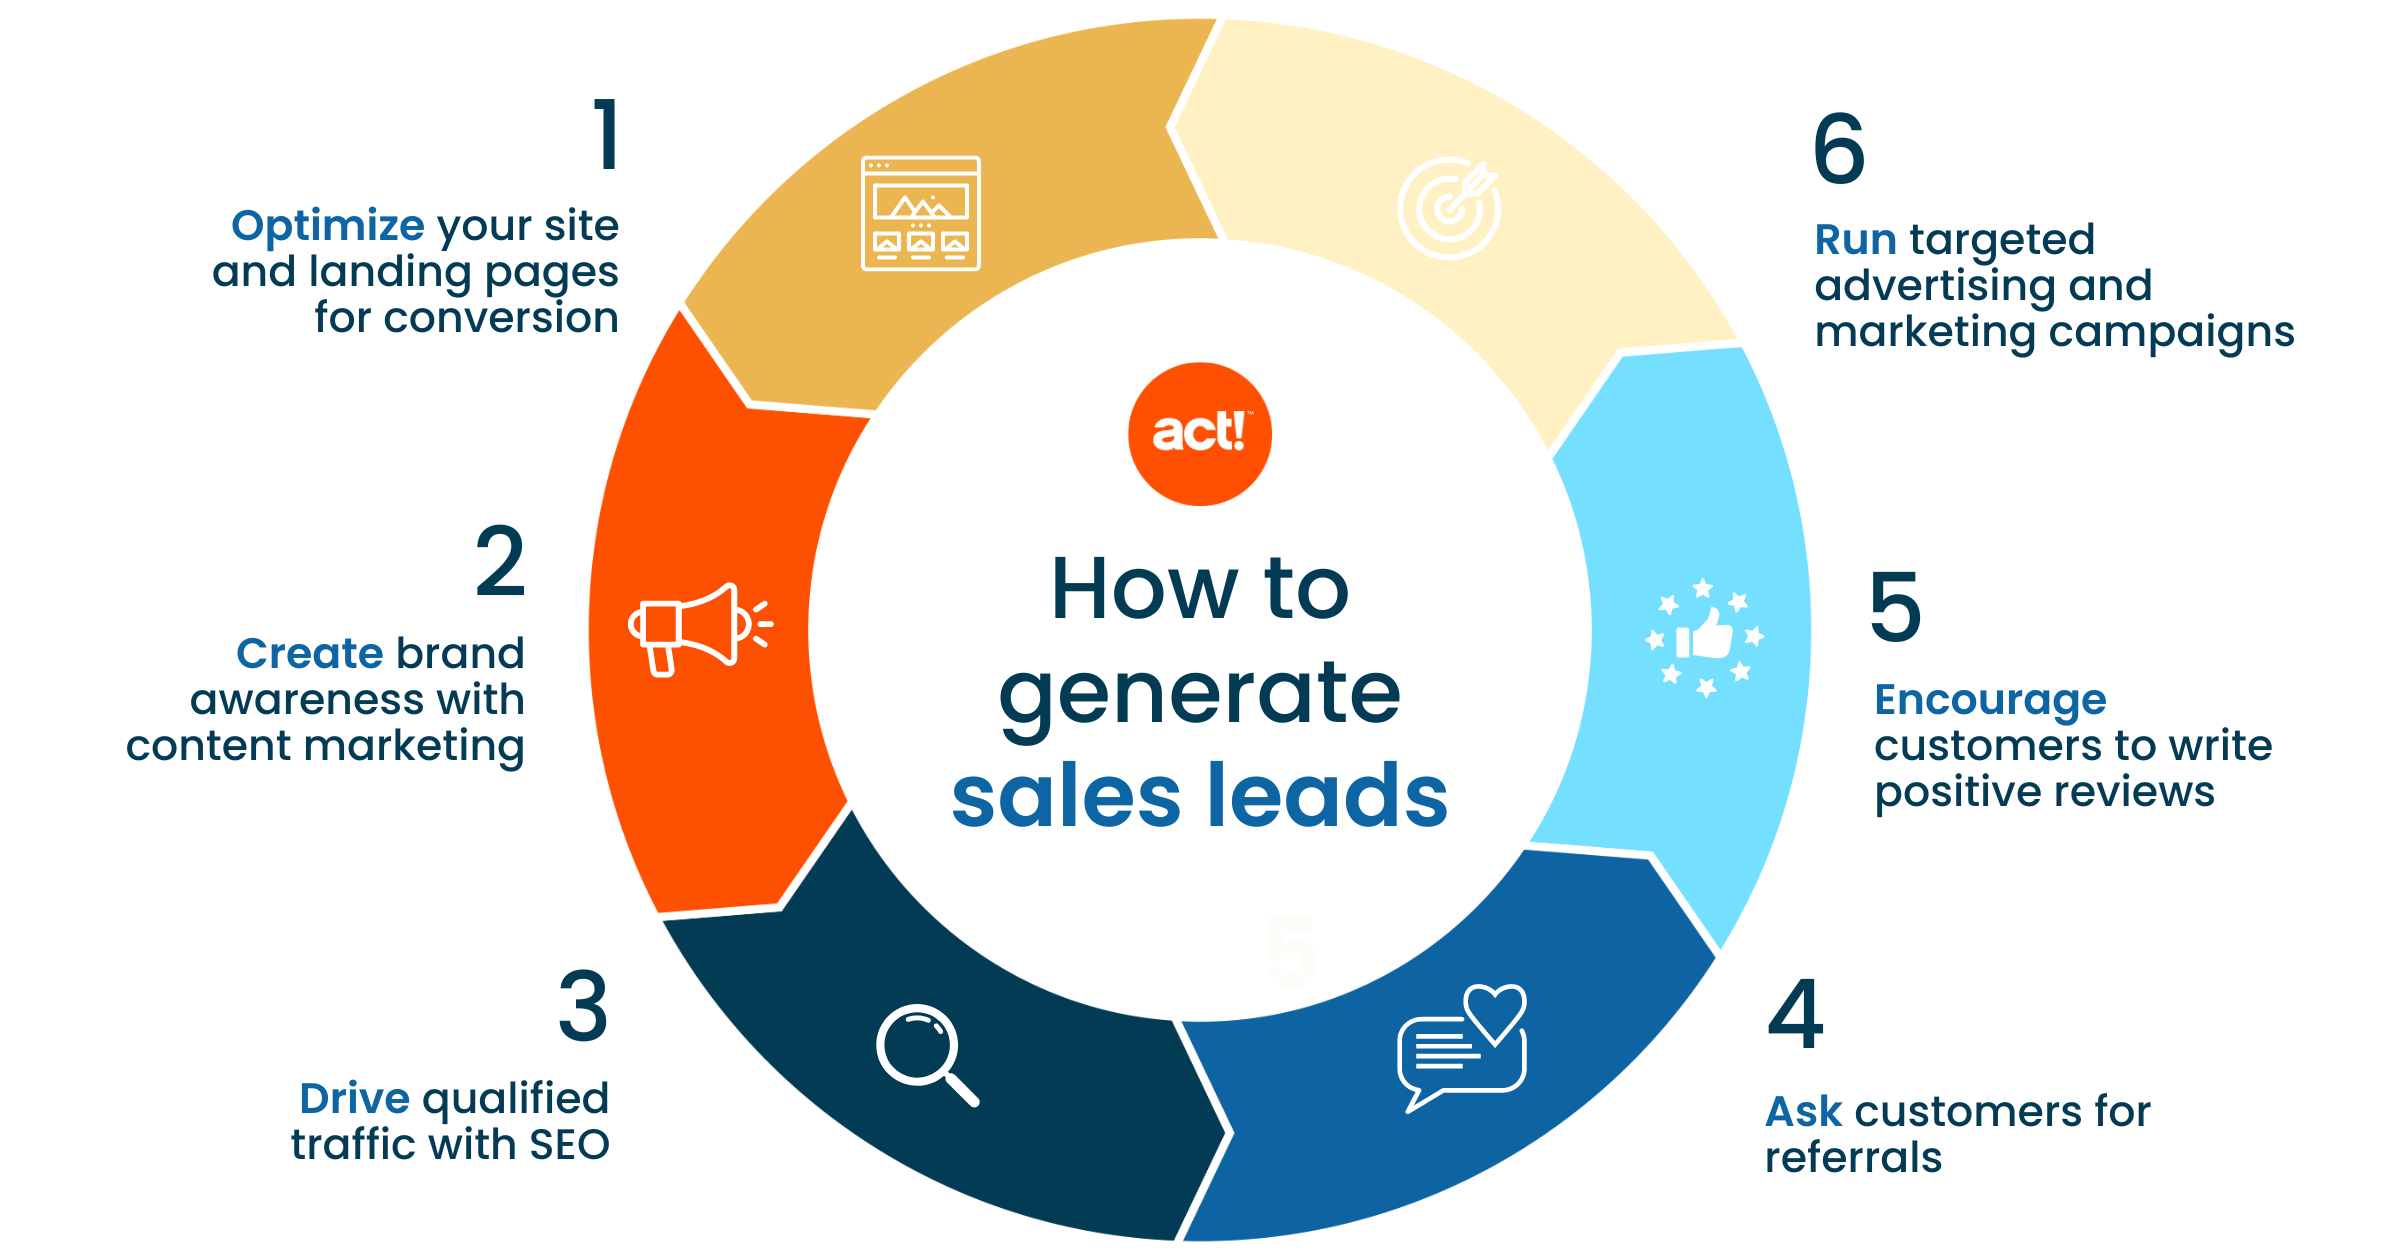 How to generate sales leads and close deals - Act!